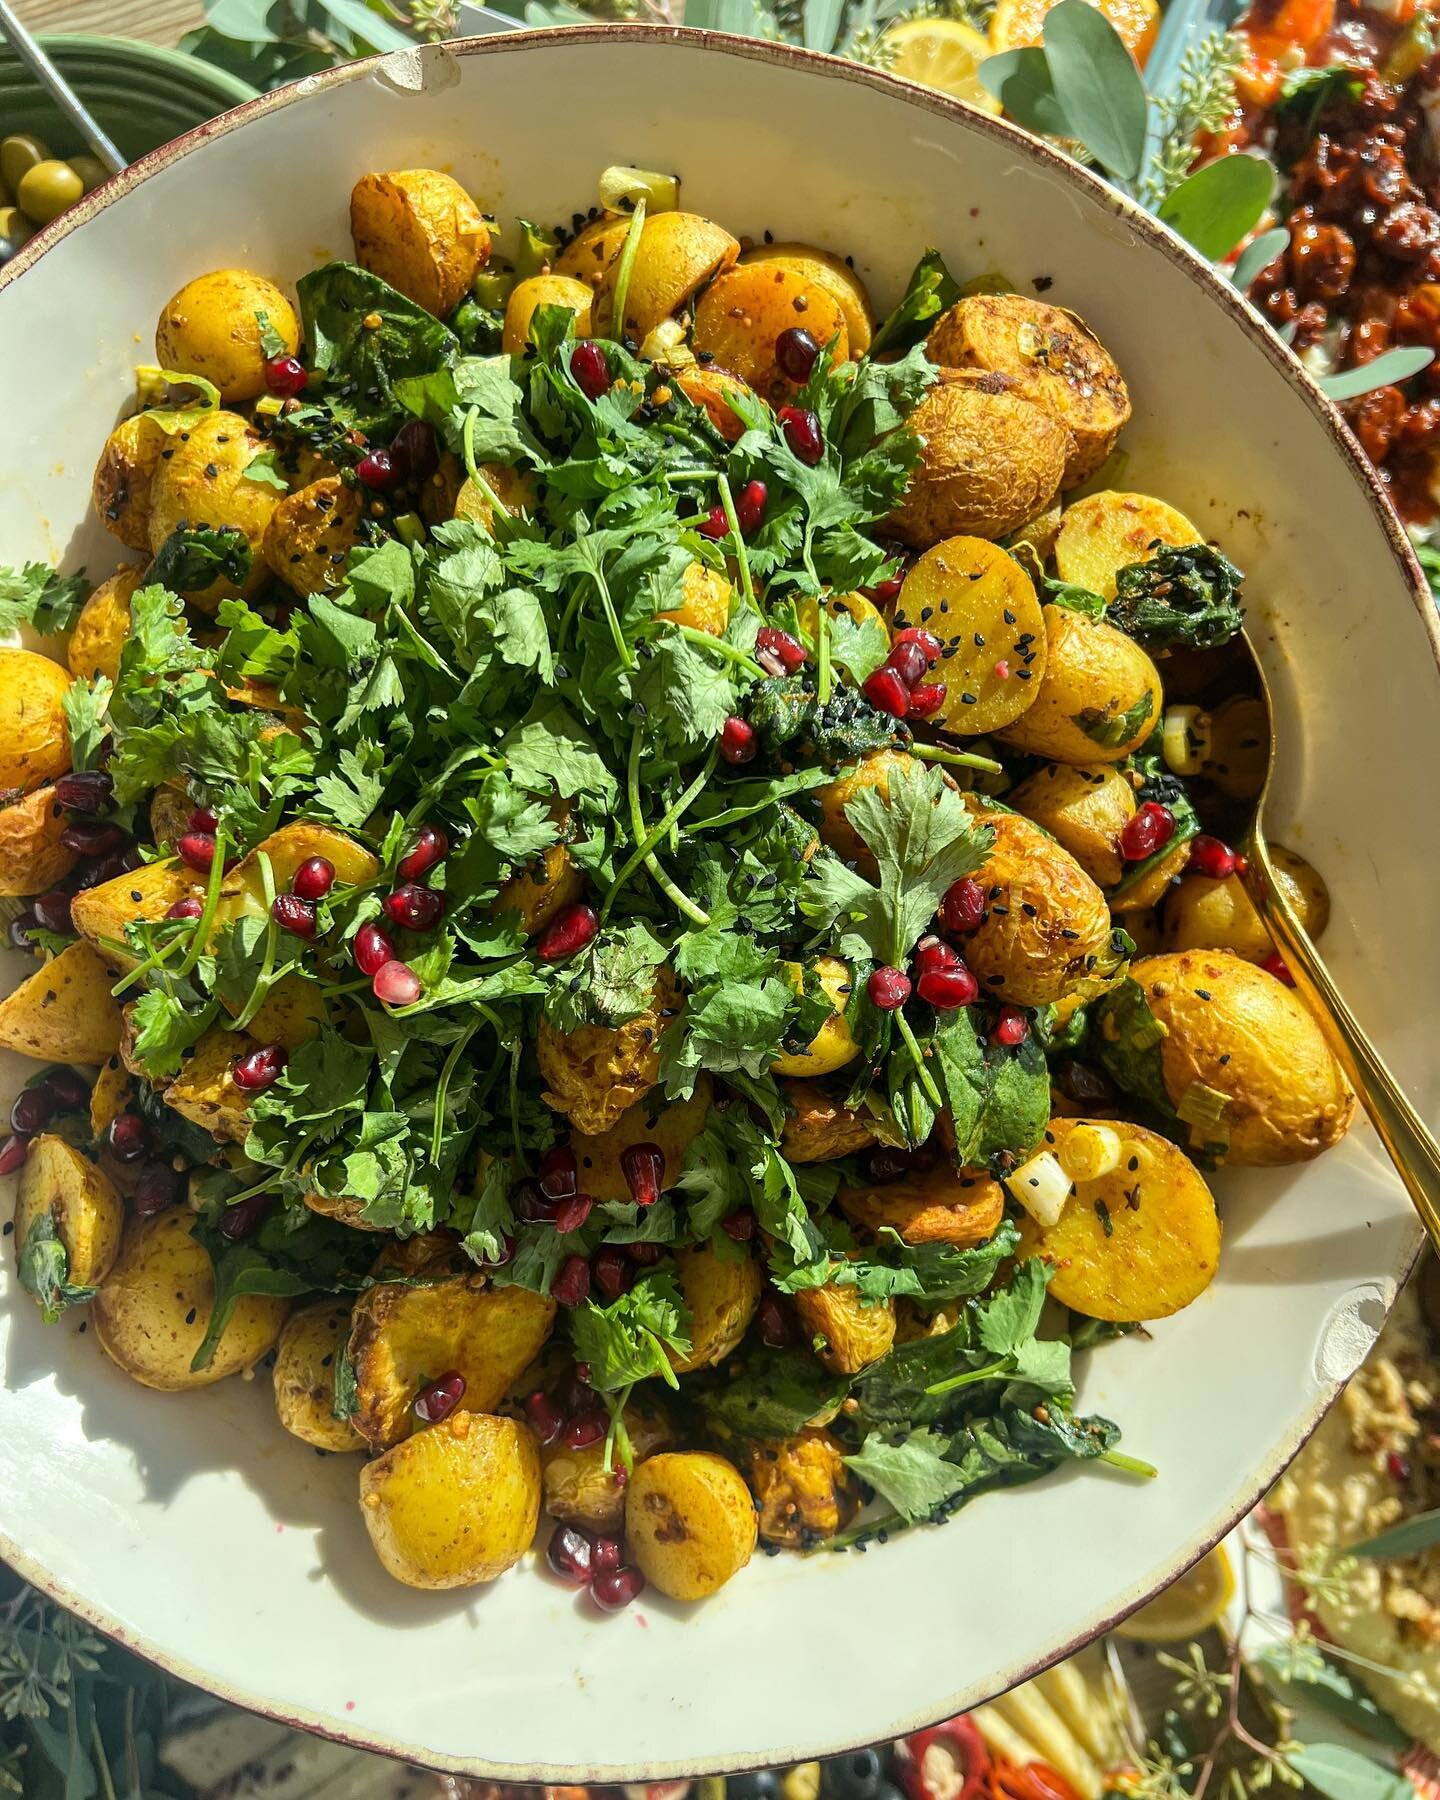 GUNPOWDER POTATO SALAD - Possible my new favourite. Spicy, fragrant and deliciously insane. Vegan and god dam fabulous!!
.
.
.
#sharing #feasting #salad #salads #gunpowderpotatoes #spicy #delicious #food #foodie #thefeedfeed #kentfood #kentcaterer #l